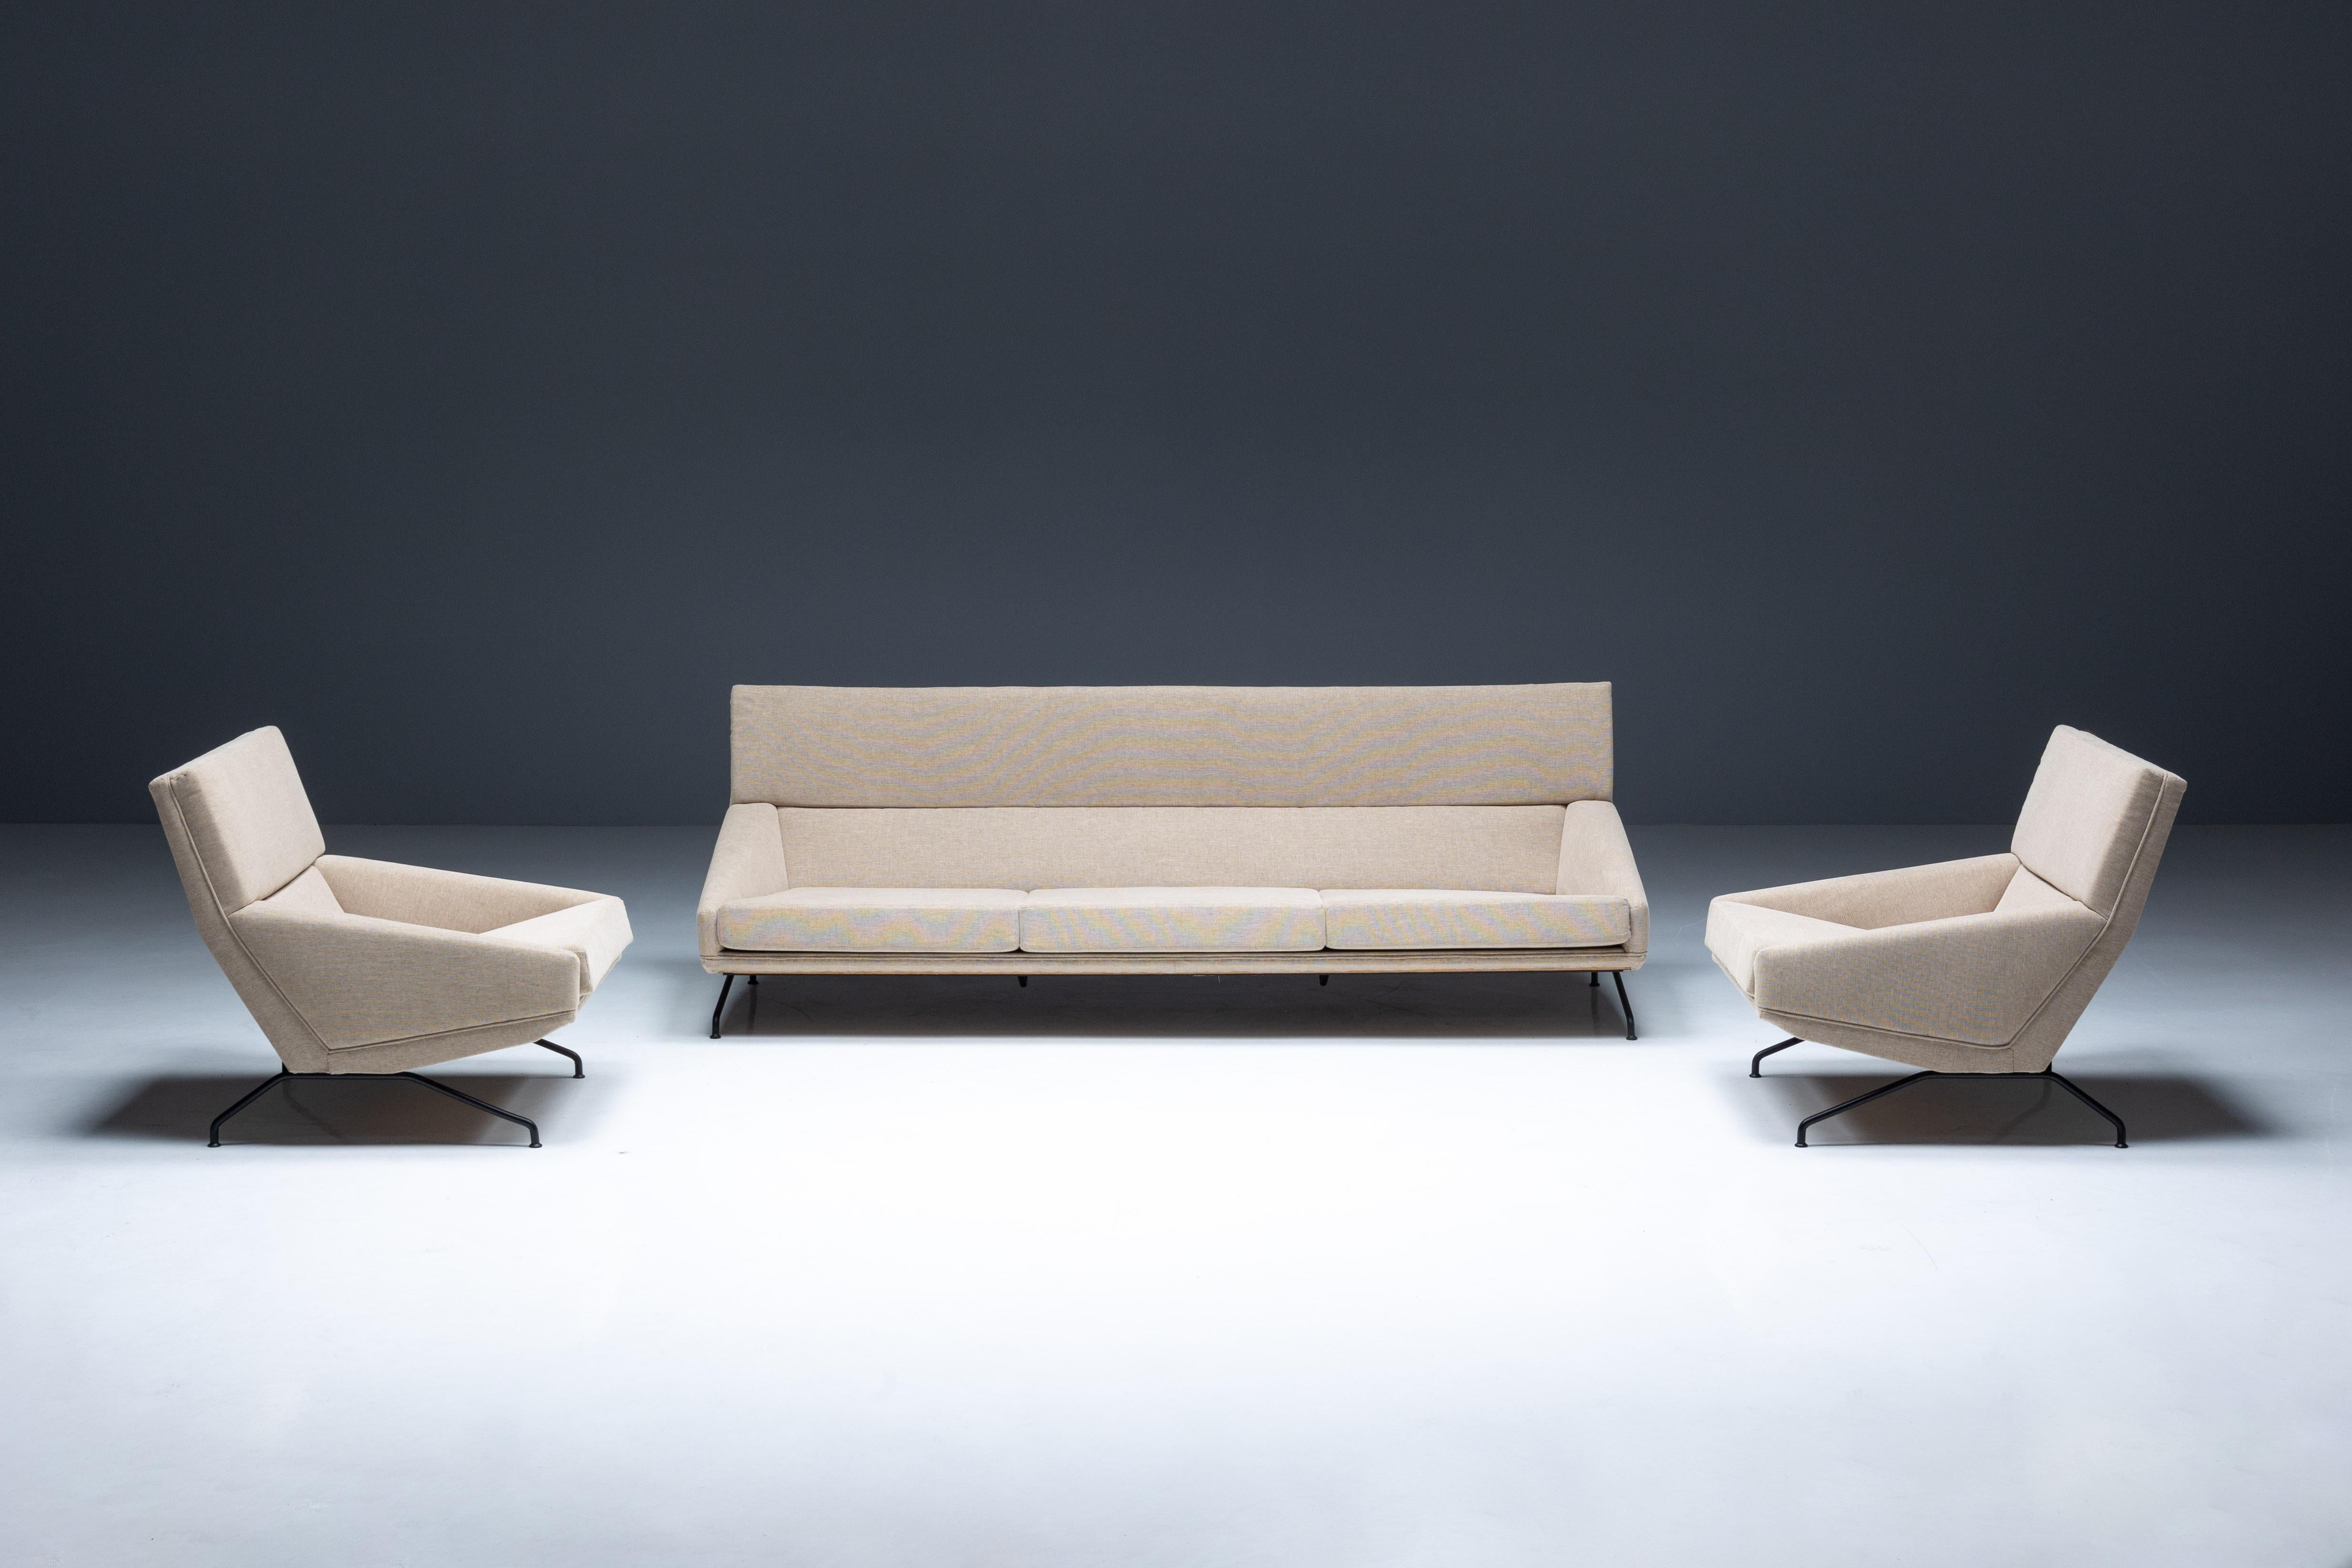 Lounge Chairs by Georges van Rijck for Beaufort, Belgium, 1960s For Sale 7